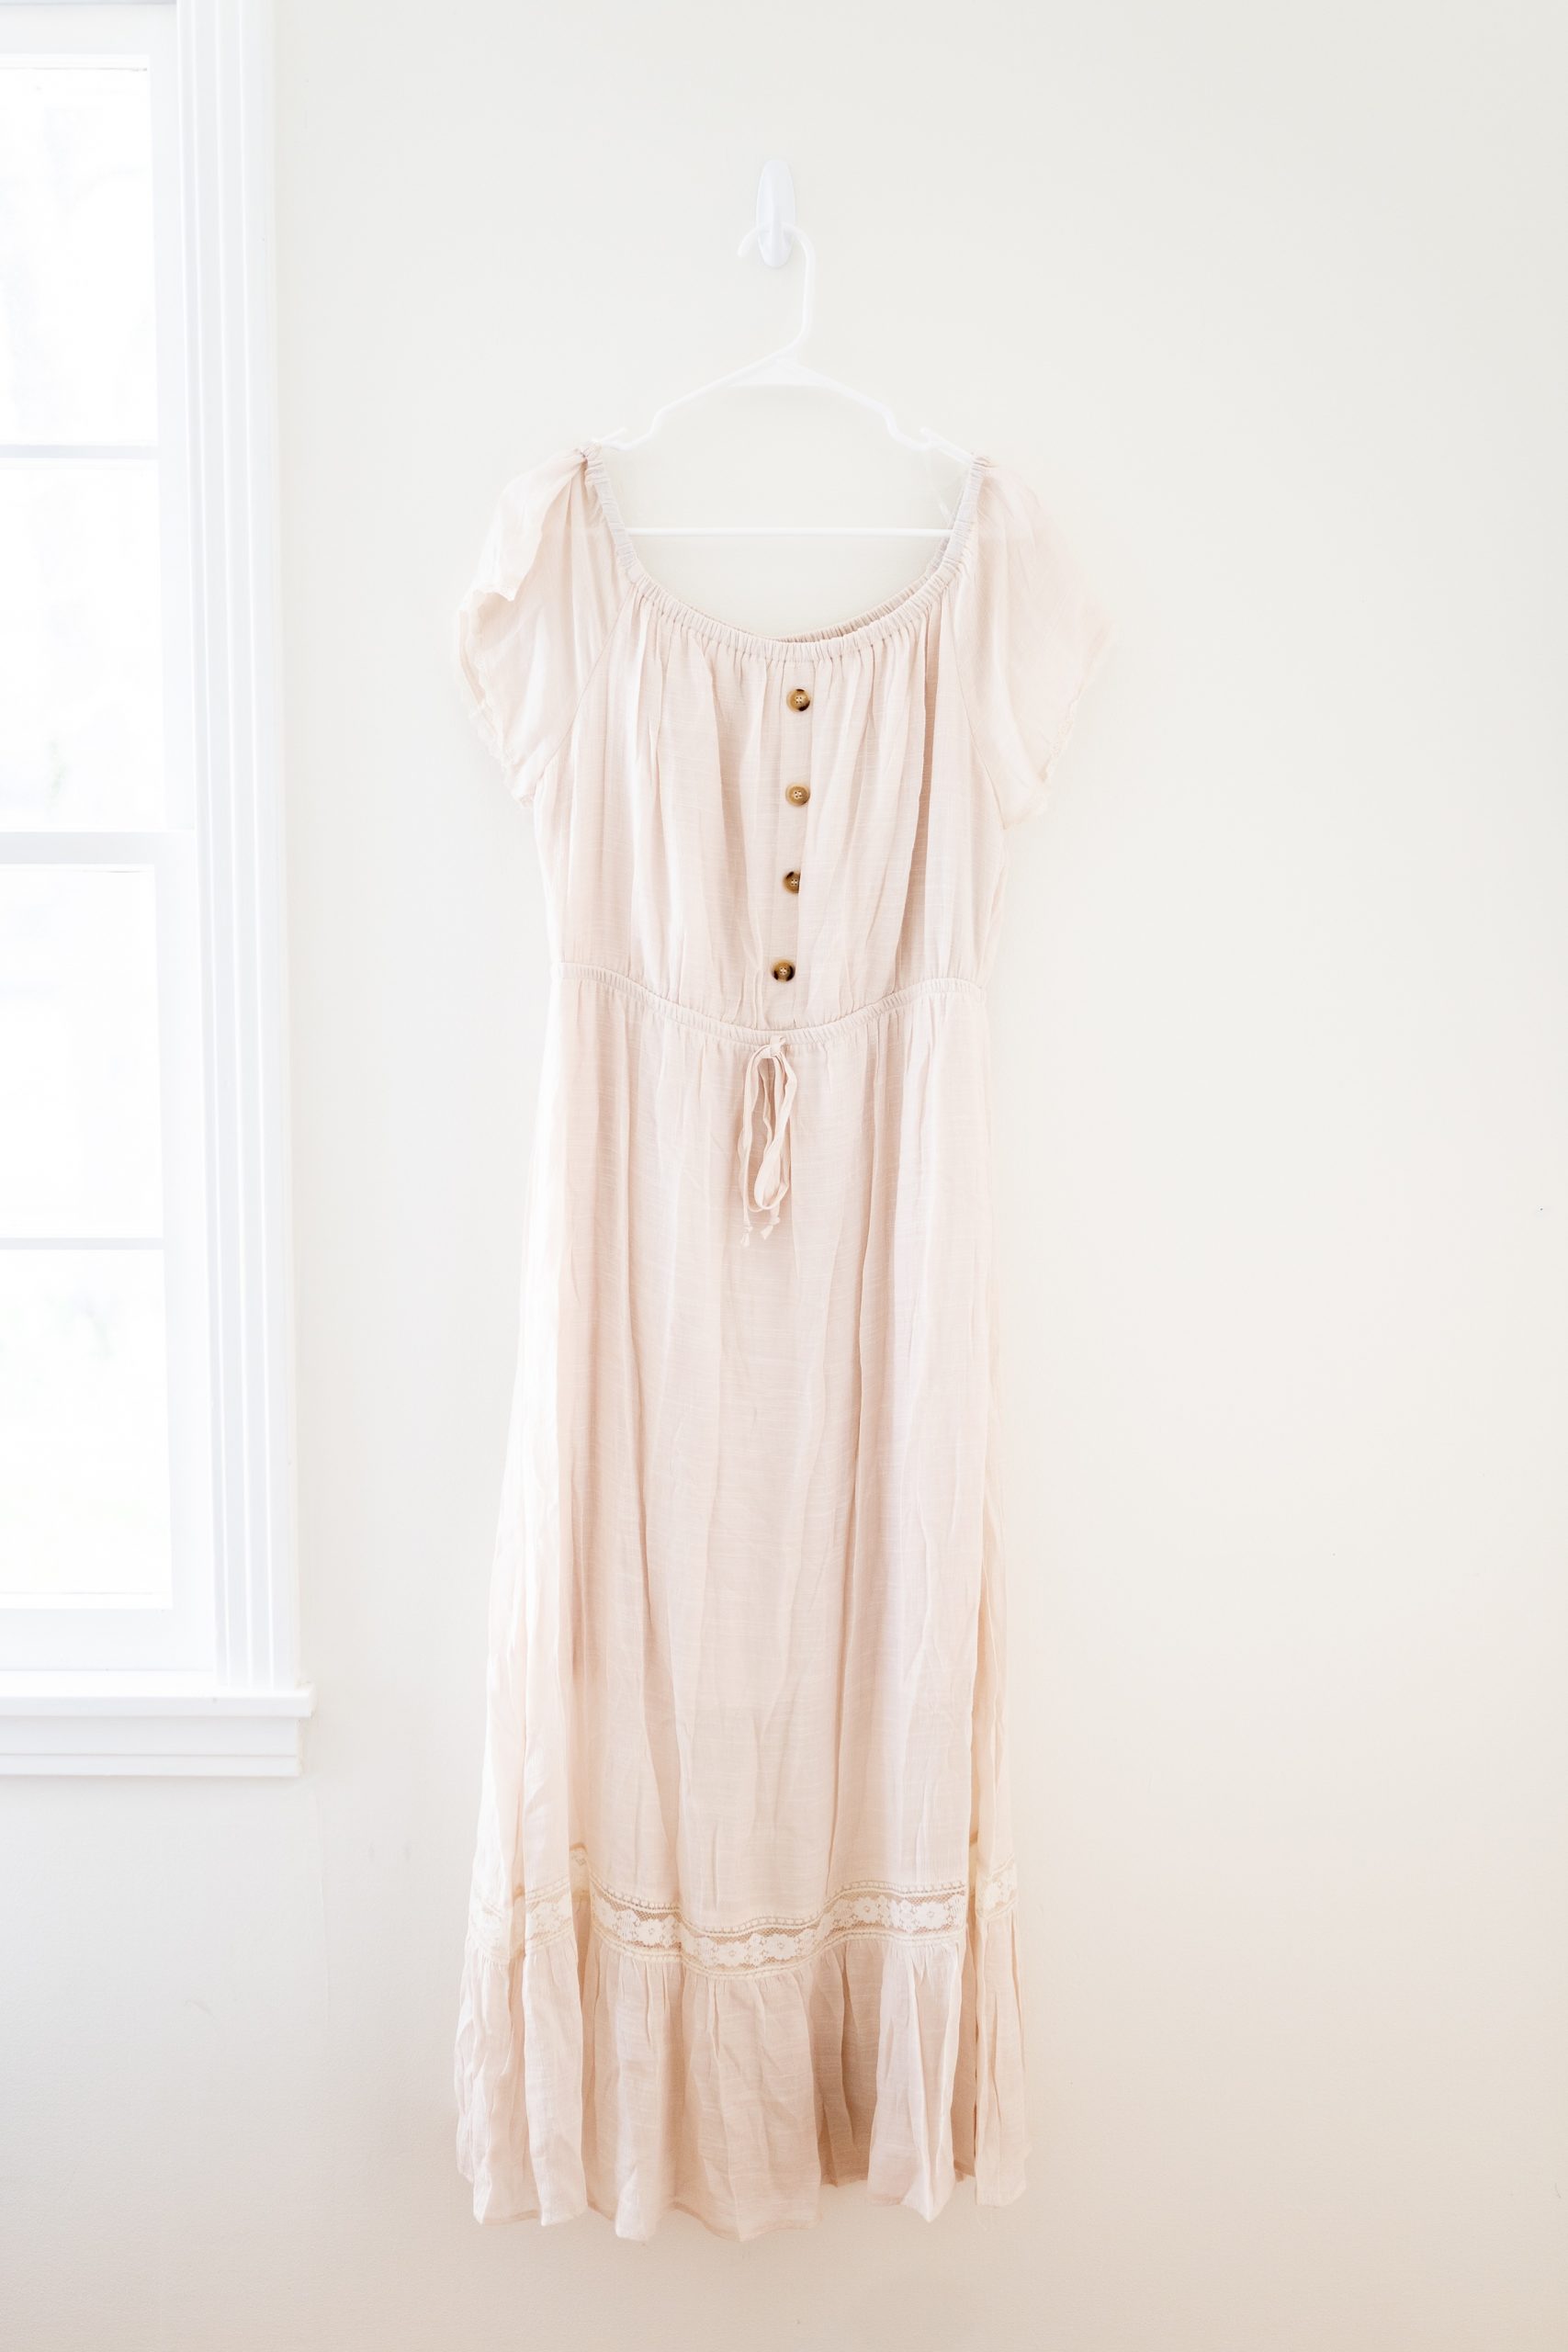 pale peach dress for mamas' wardrobe shared by maternity, newborn and family photographer Grace Paul Photography